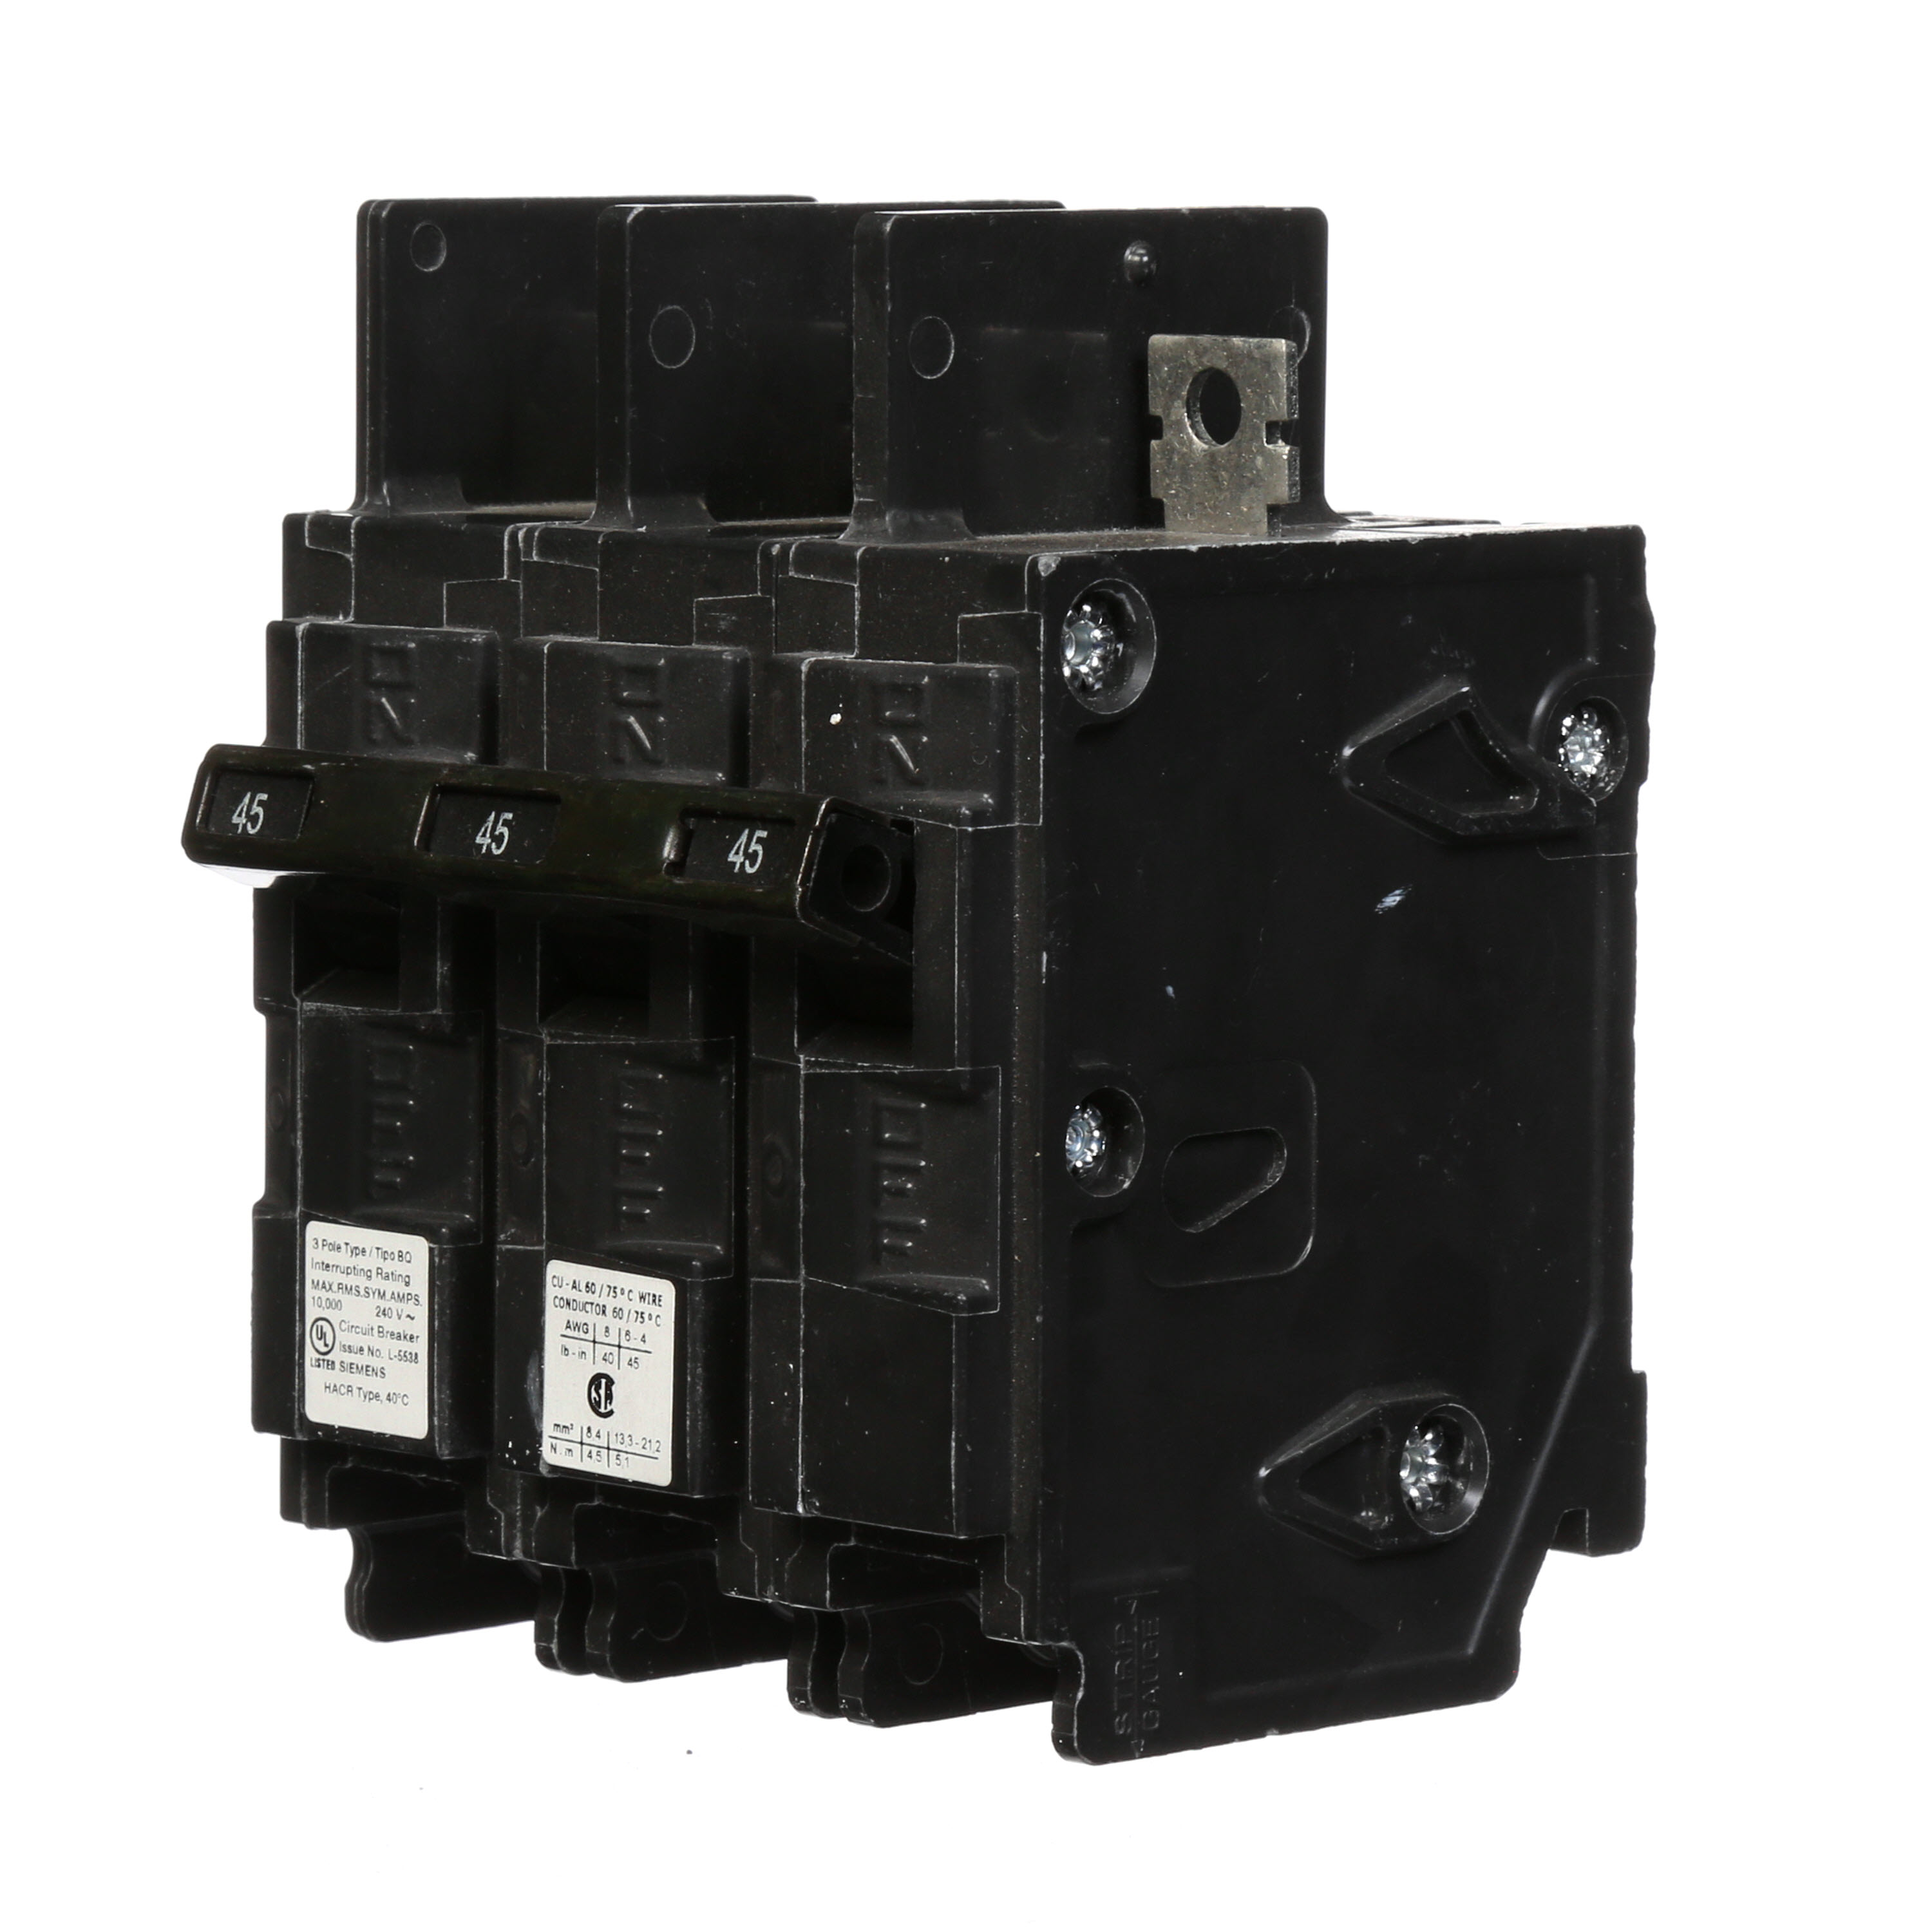 Siemens Low Voltage Molded Case Circuit Breakers General Purpose MCCBs are Circuit Protection Molded Case Circuit Breakers. 3-Pole Common-Trip circuit breaker type BQ. Rated 240V (045A) (AIR 10 kA). Special features Load side lugs are included.